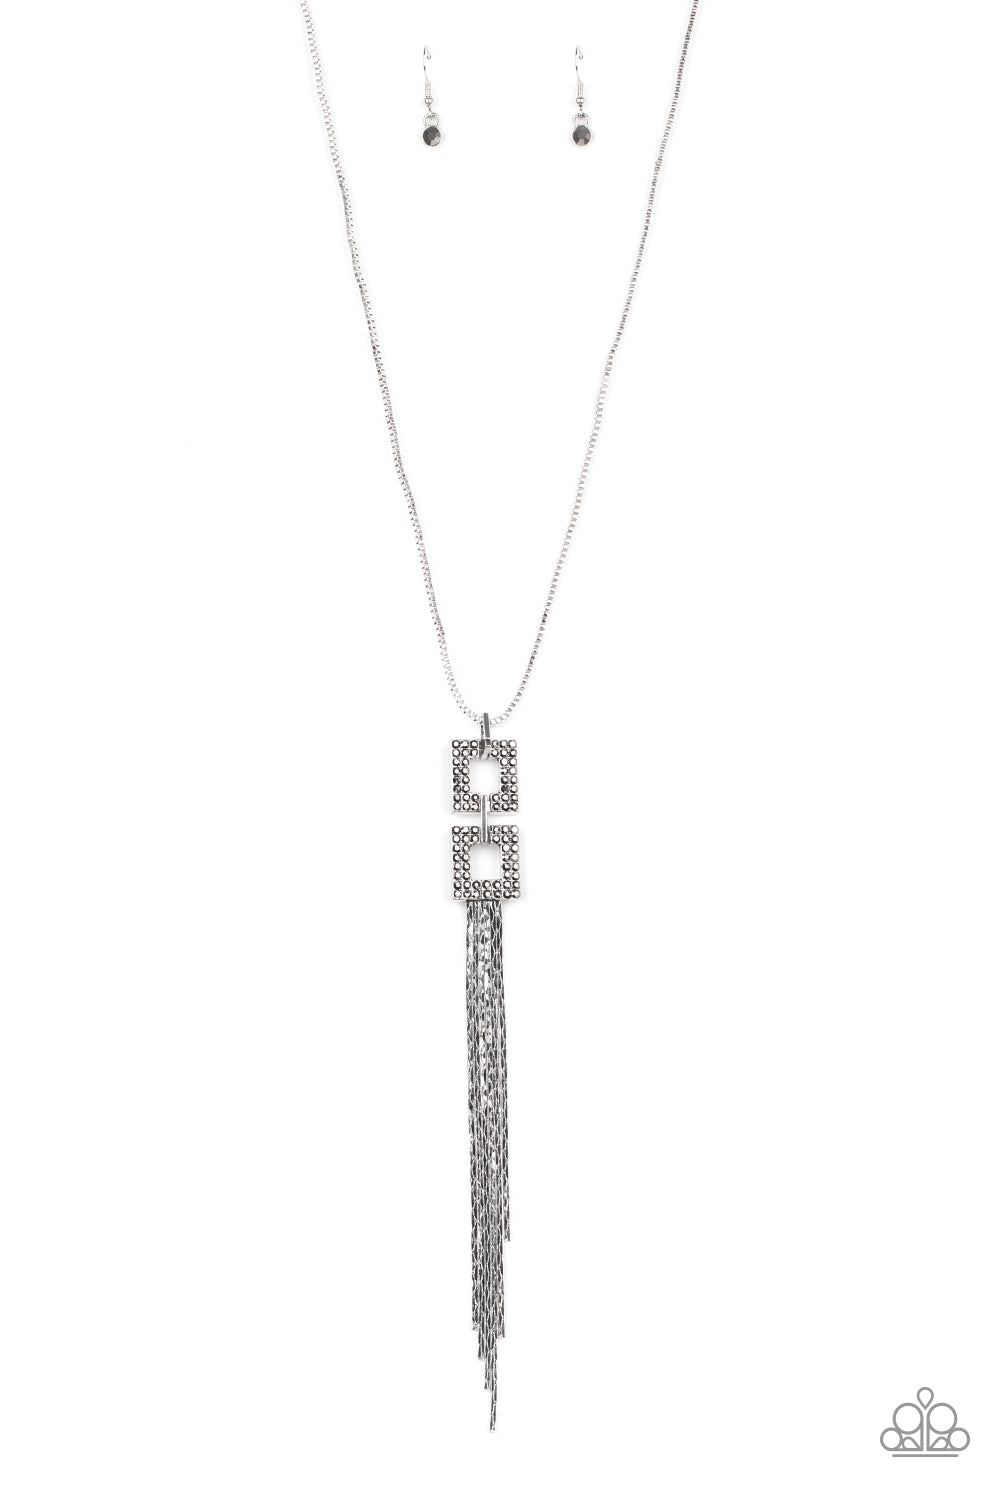 Paparazzi Times Square Stunner Silver Long Necklace - Convention 2020